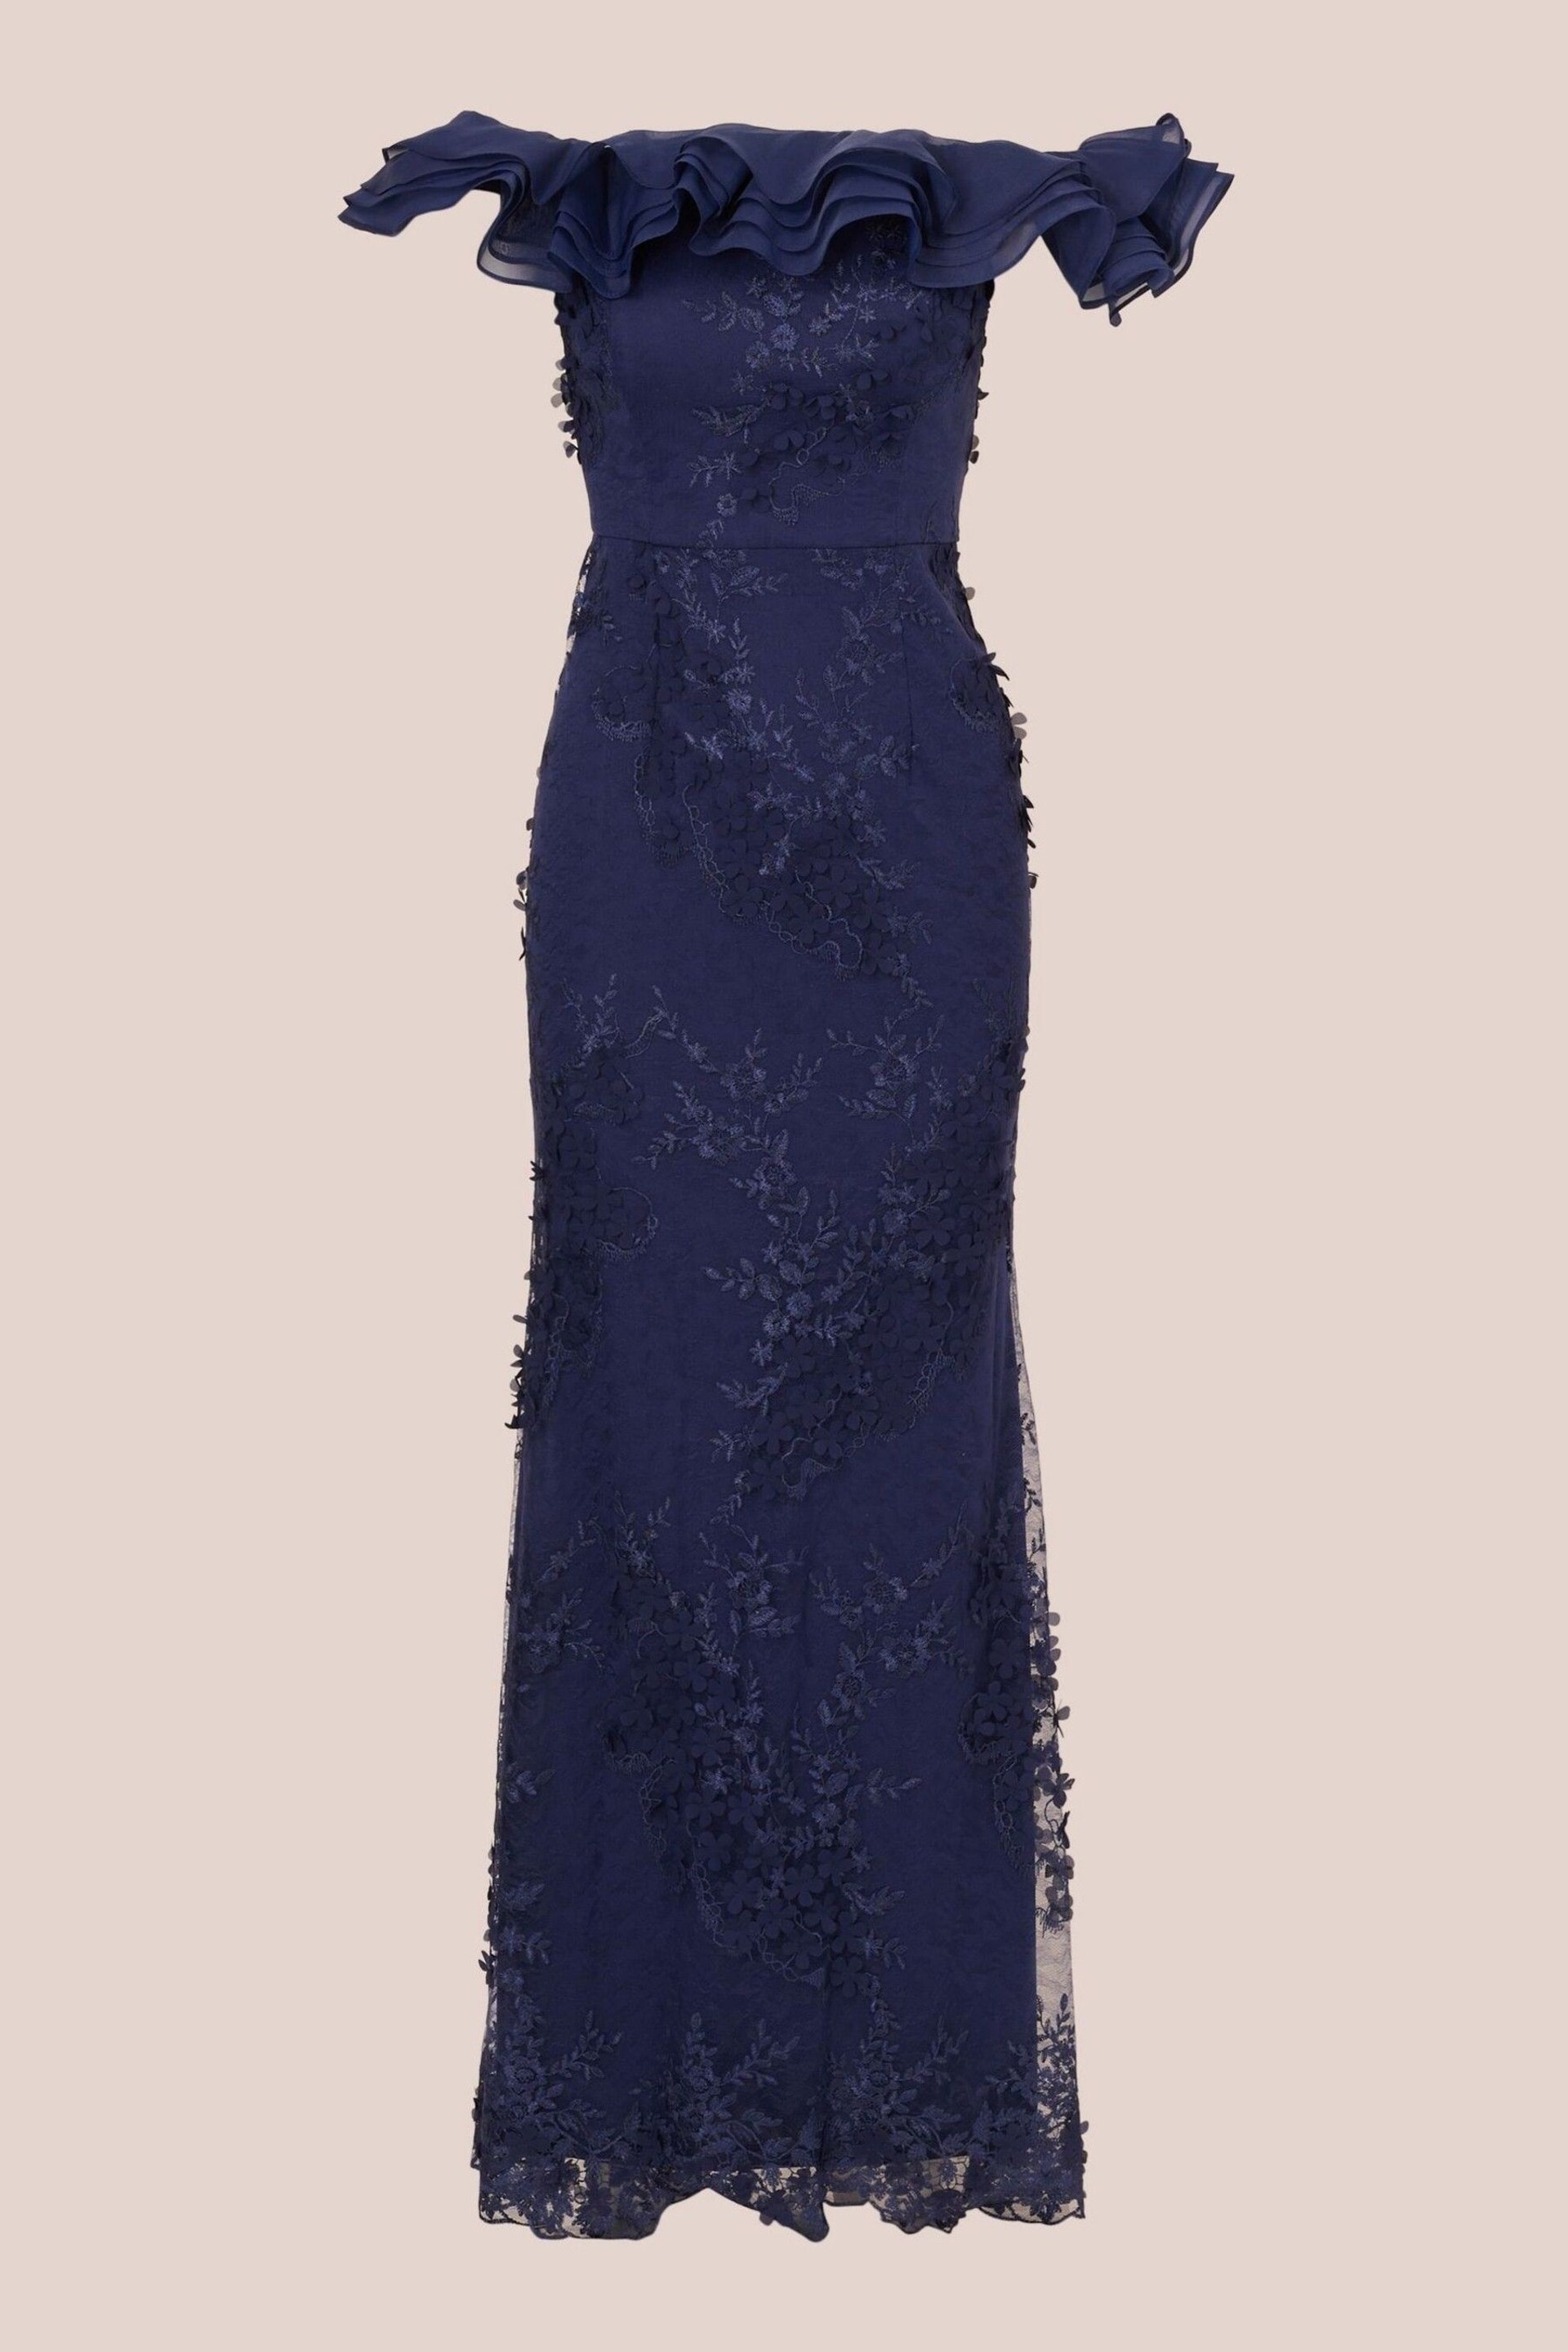 Adrianna Papell Blue Floral Ruffle Gown - Image 6 of 7